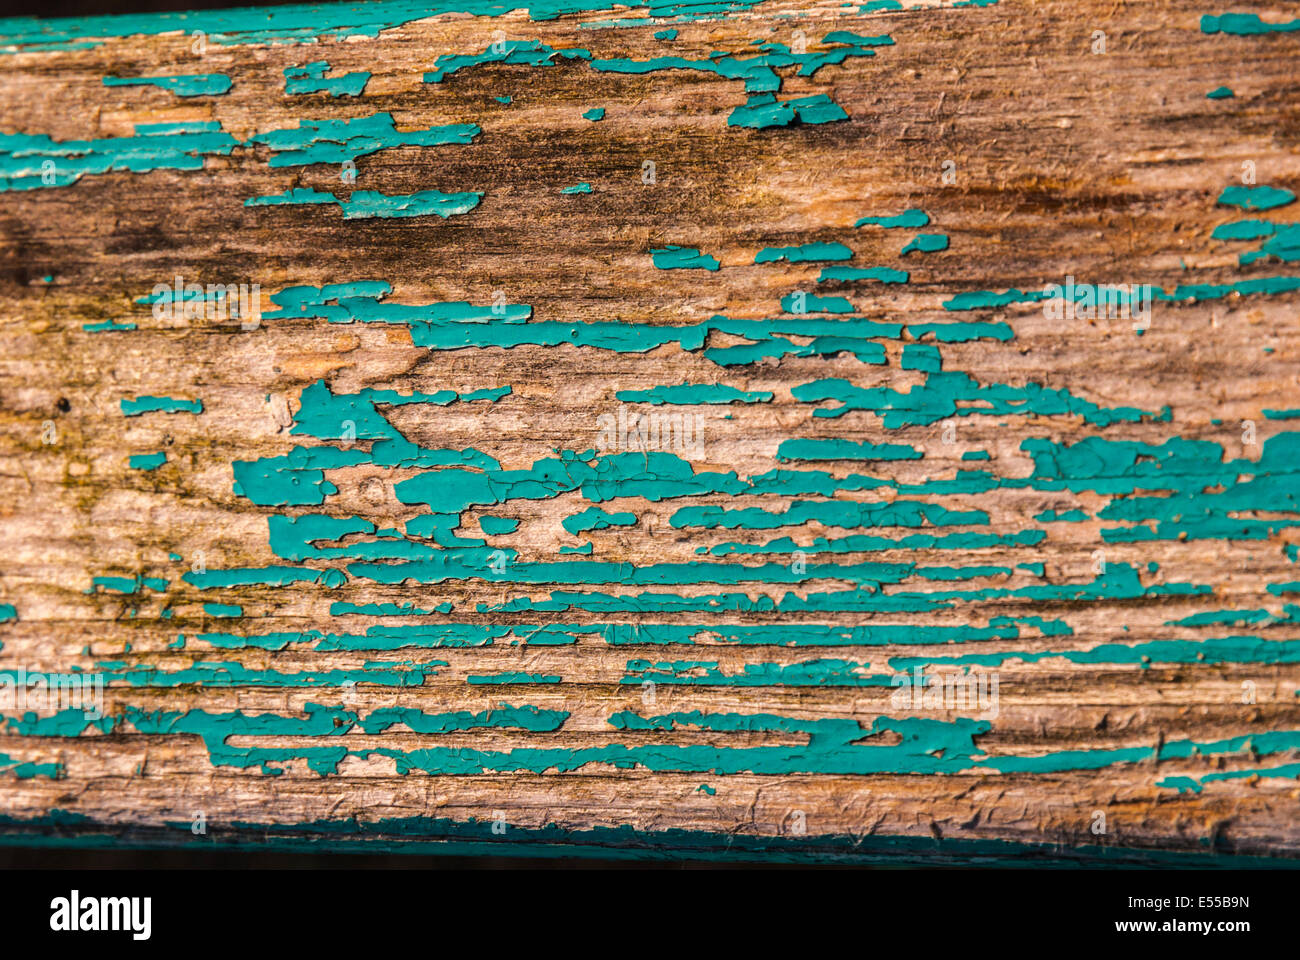 A plank of wood with flaky Turquoise paint Stock Photo